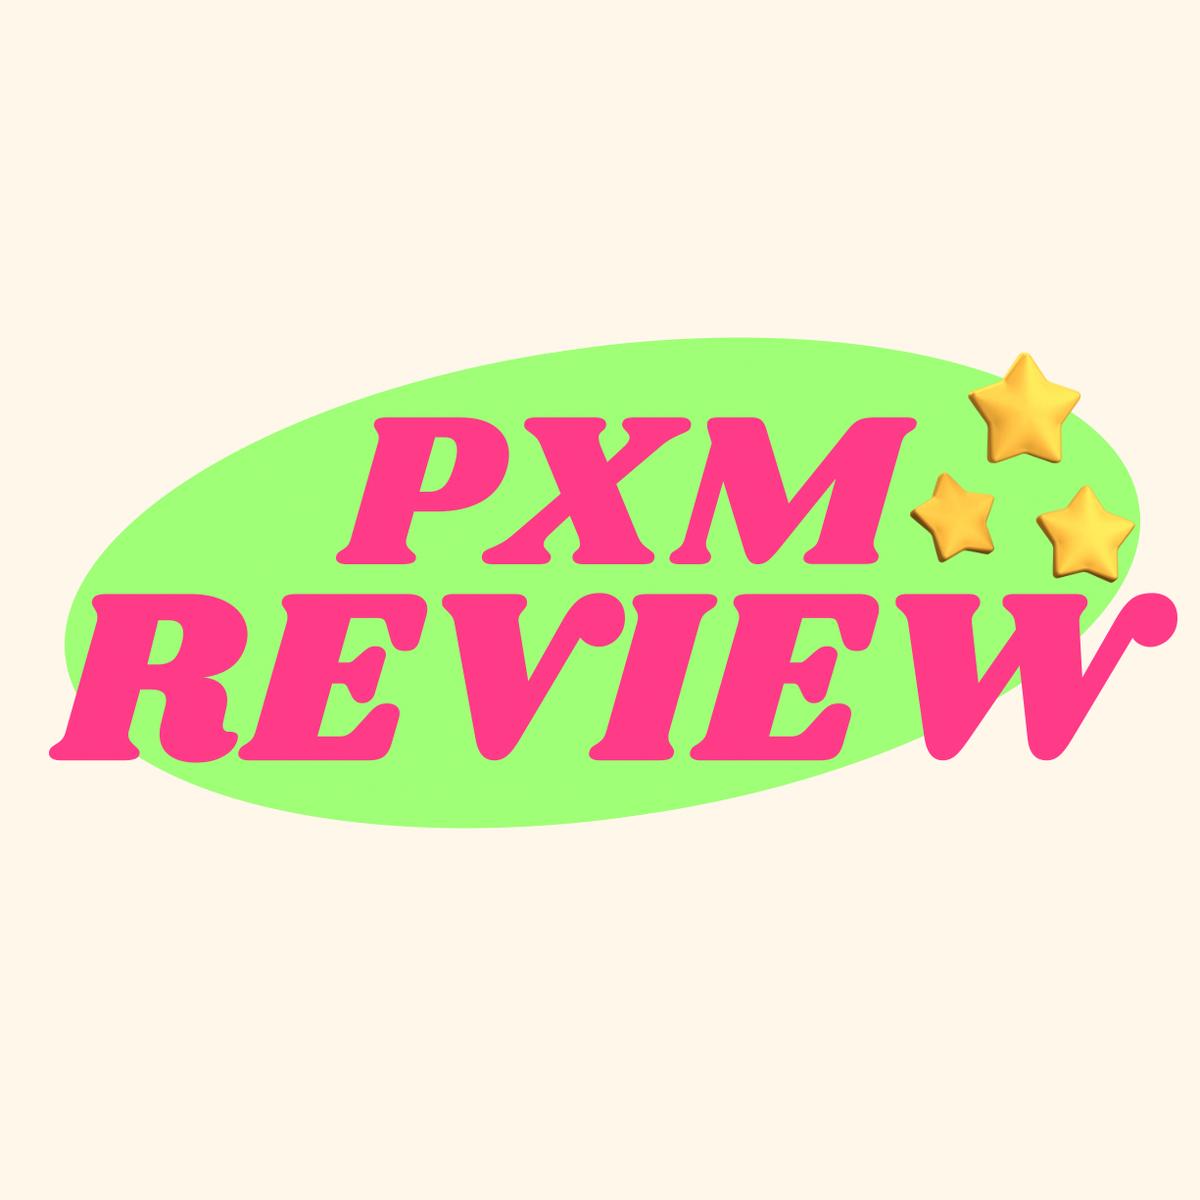 pxmreview's images